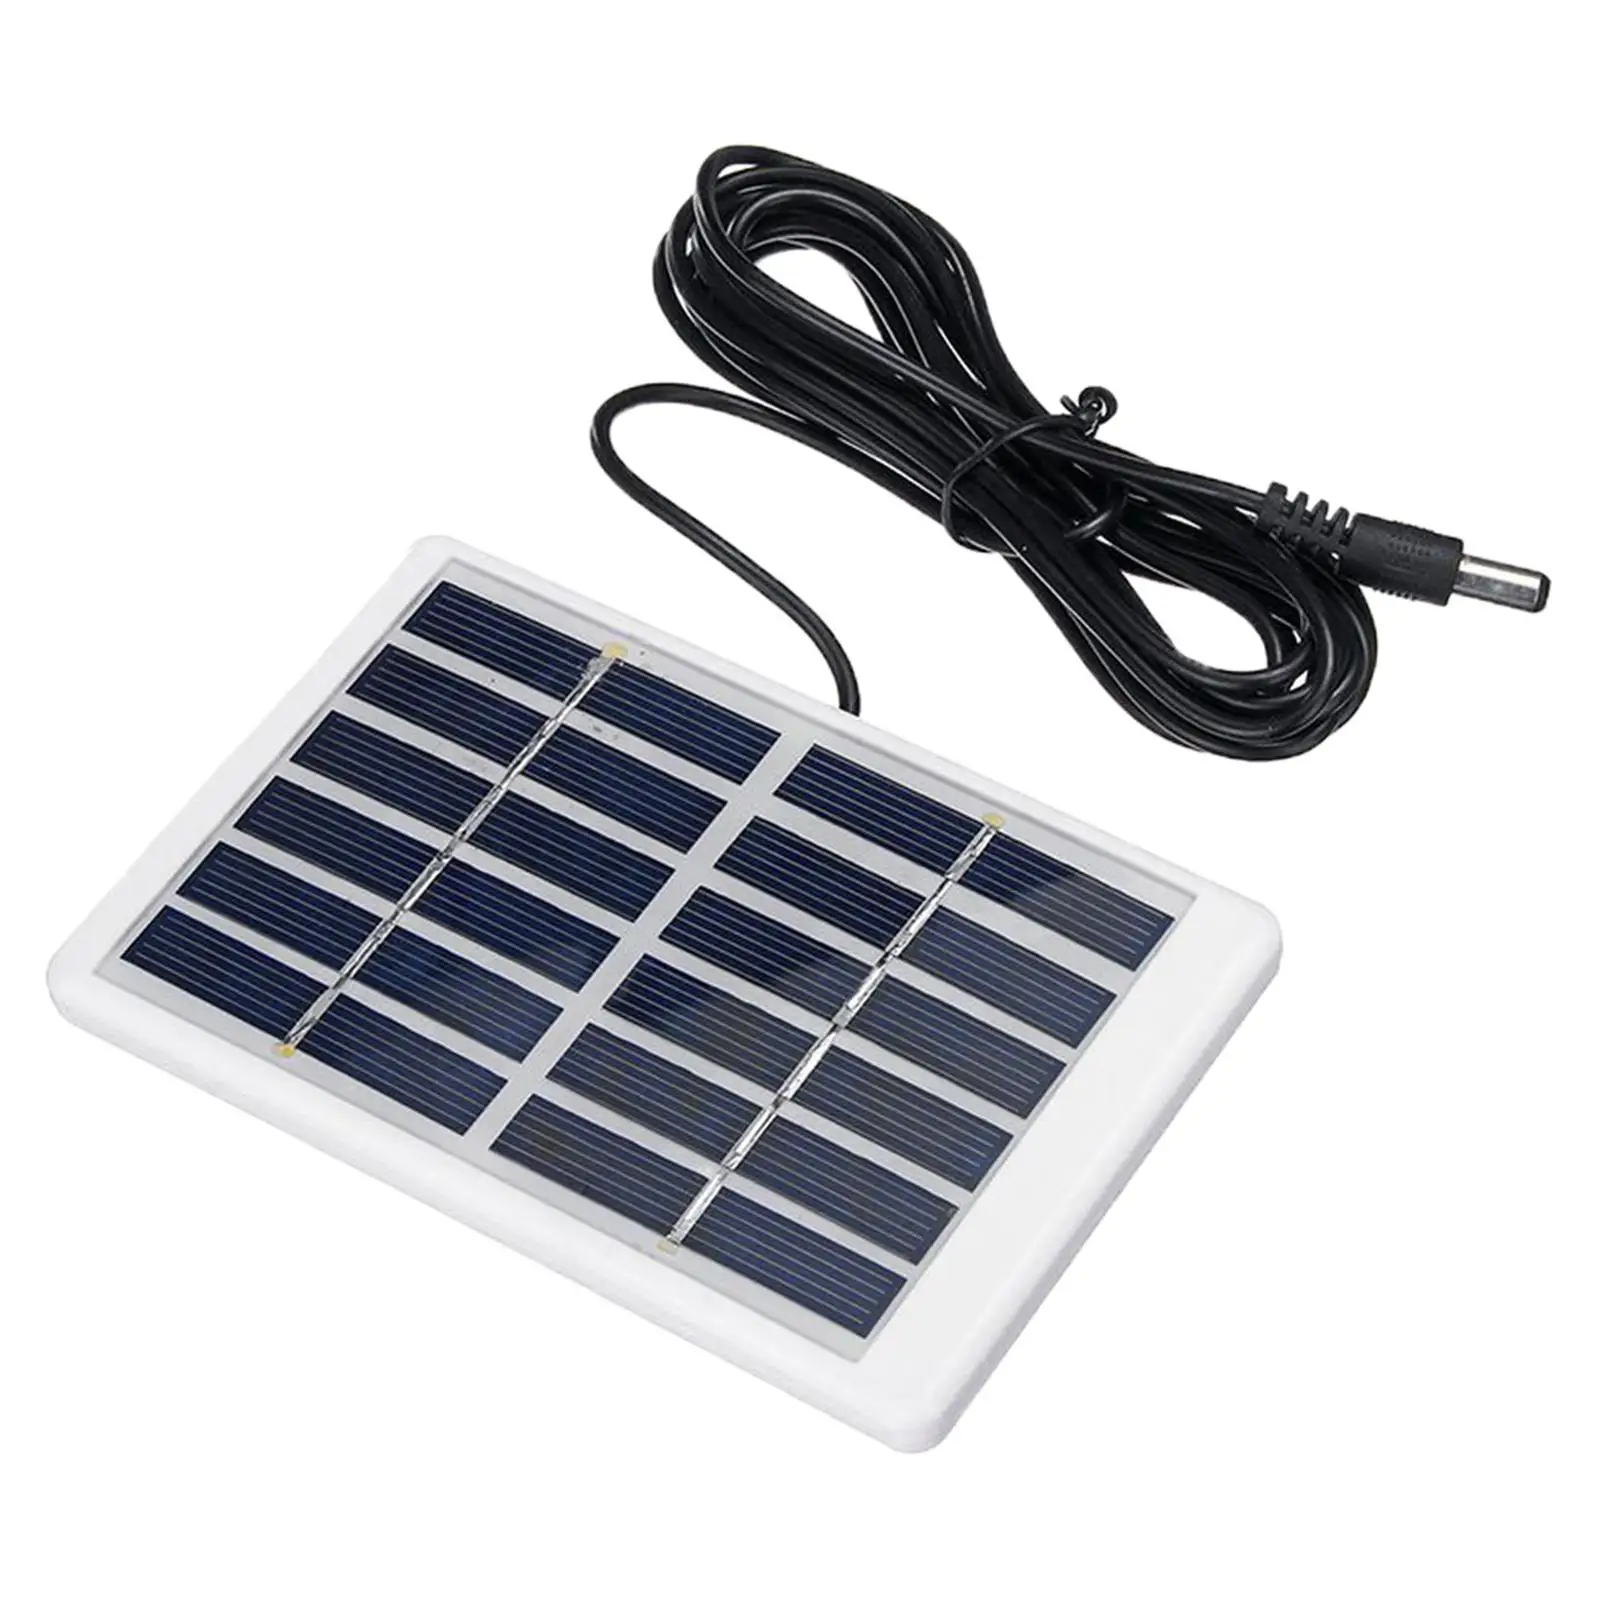 Portable DIY Battery Power Charge Module Solar Lights Polycrystalline 3 Meters DC Cable Mini